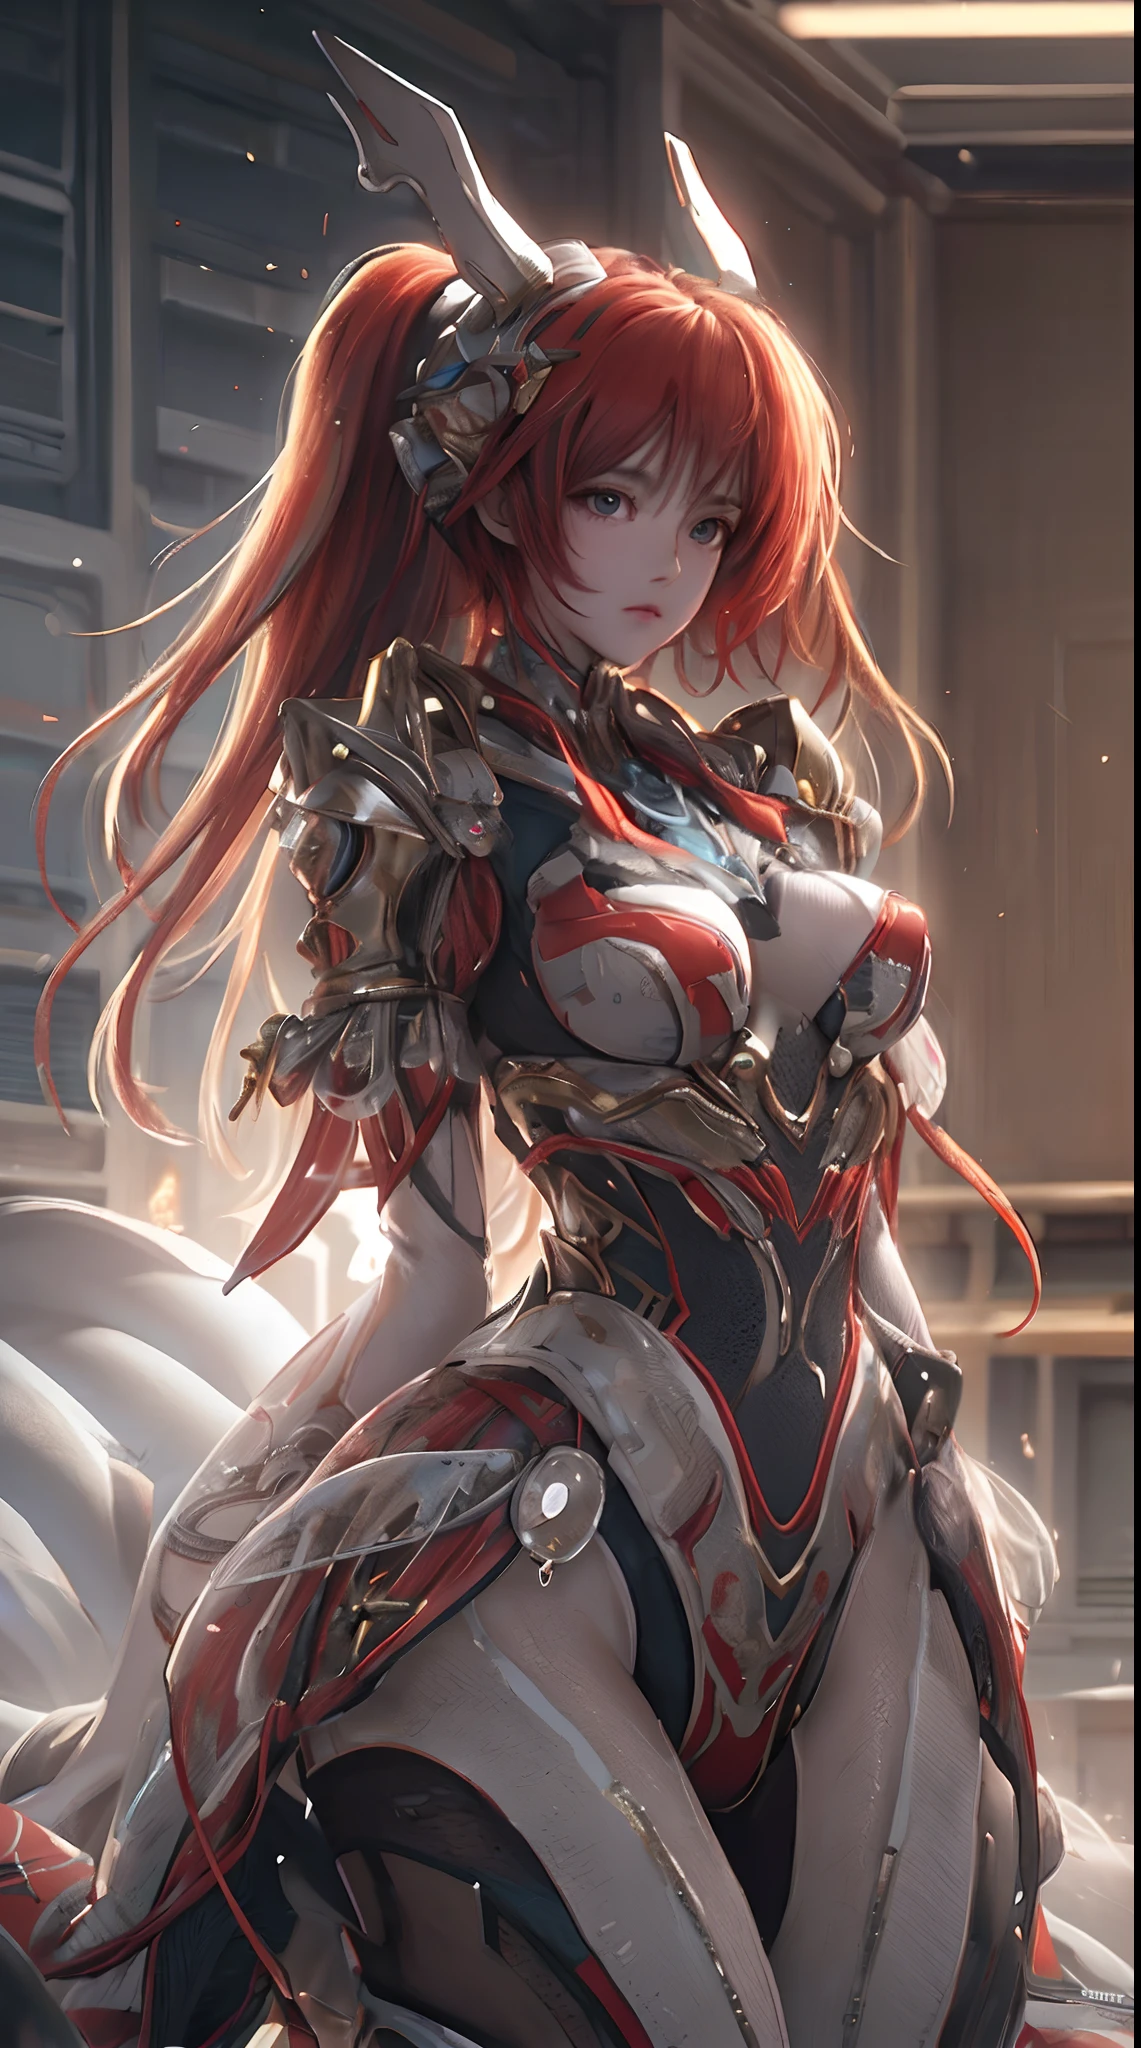 (((best quality))),(((very detailed))),(((masterpiece))),illustration,1 girl, big breasts, no face, mysterious, helmet, Asuka cosplay costume, bodysuit, standing pose,  Expression of extreme detail ,Ultra High Definition,Maximum Detail Display,Hyperdetail,Clear detail,Excellent quality,Super detail,Amazing,HDR,16K,detail,The most authentic,Gloss red color